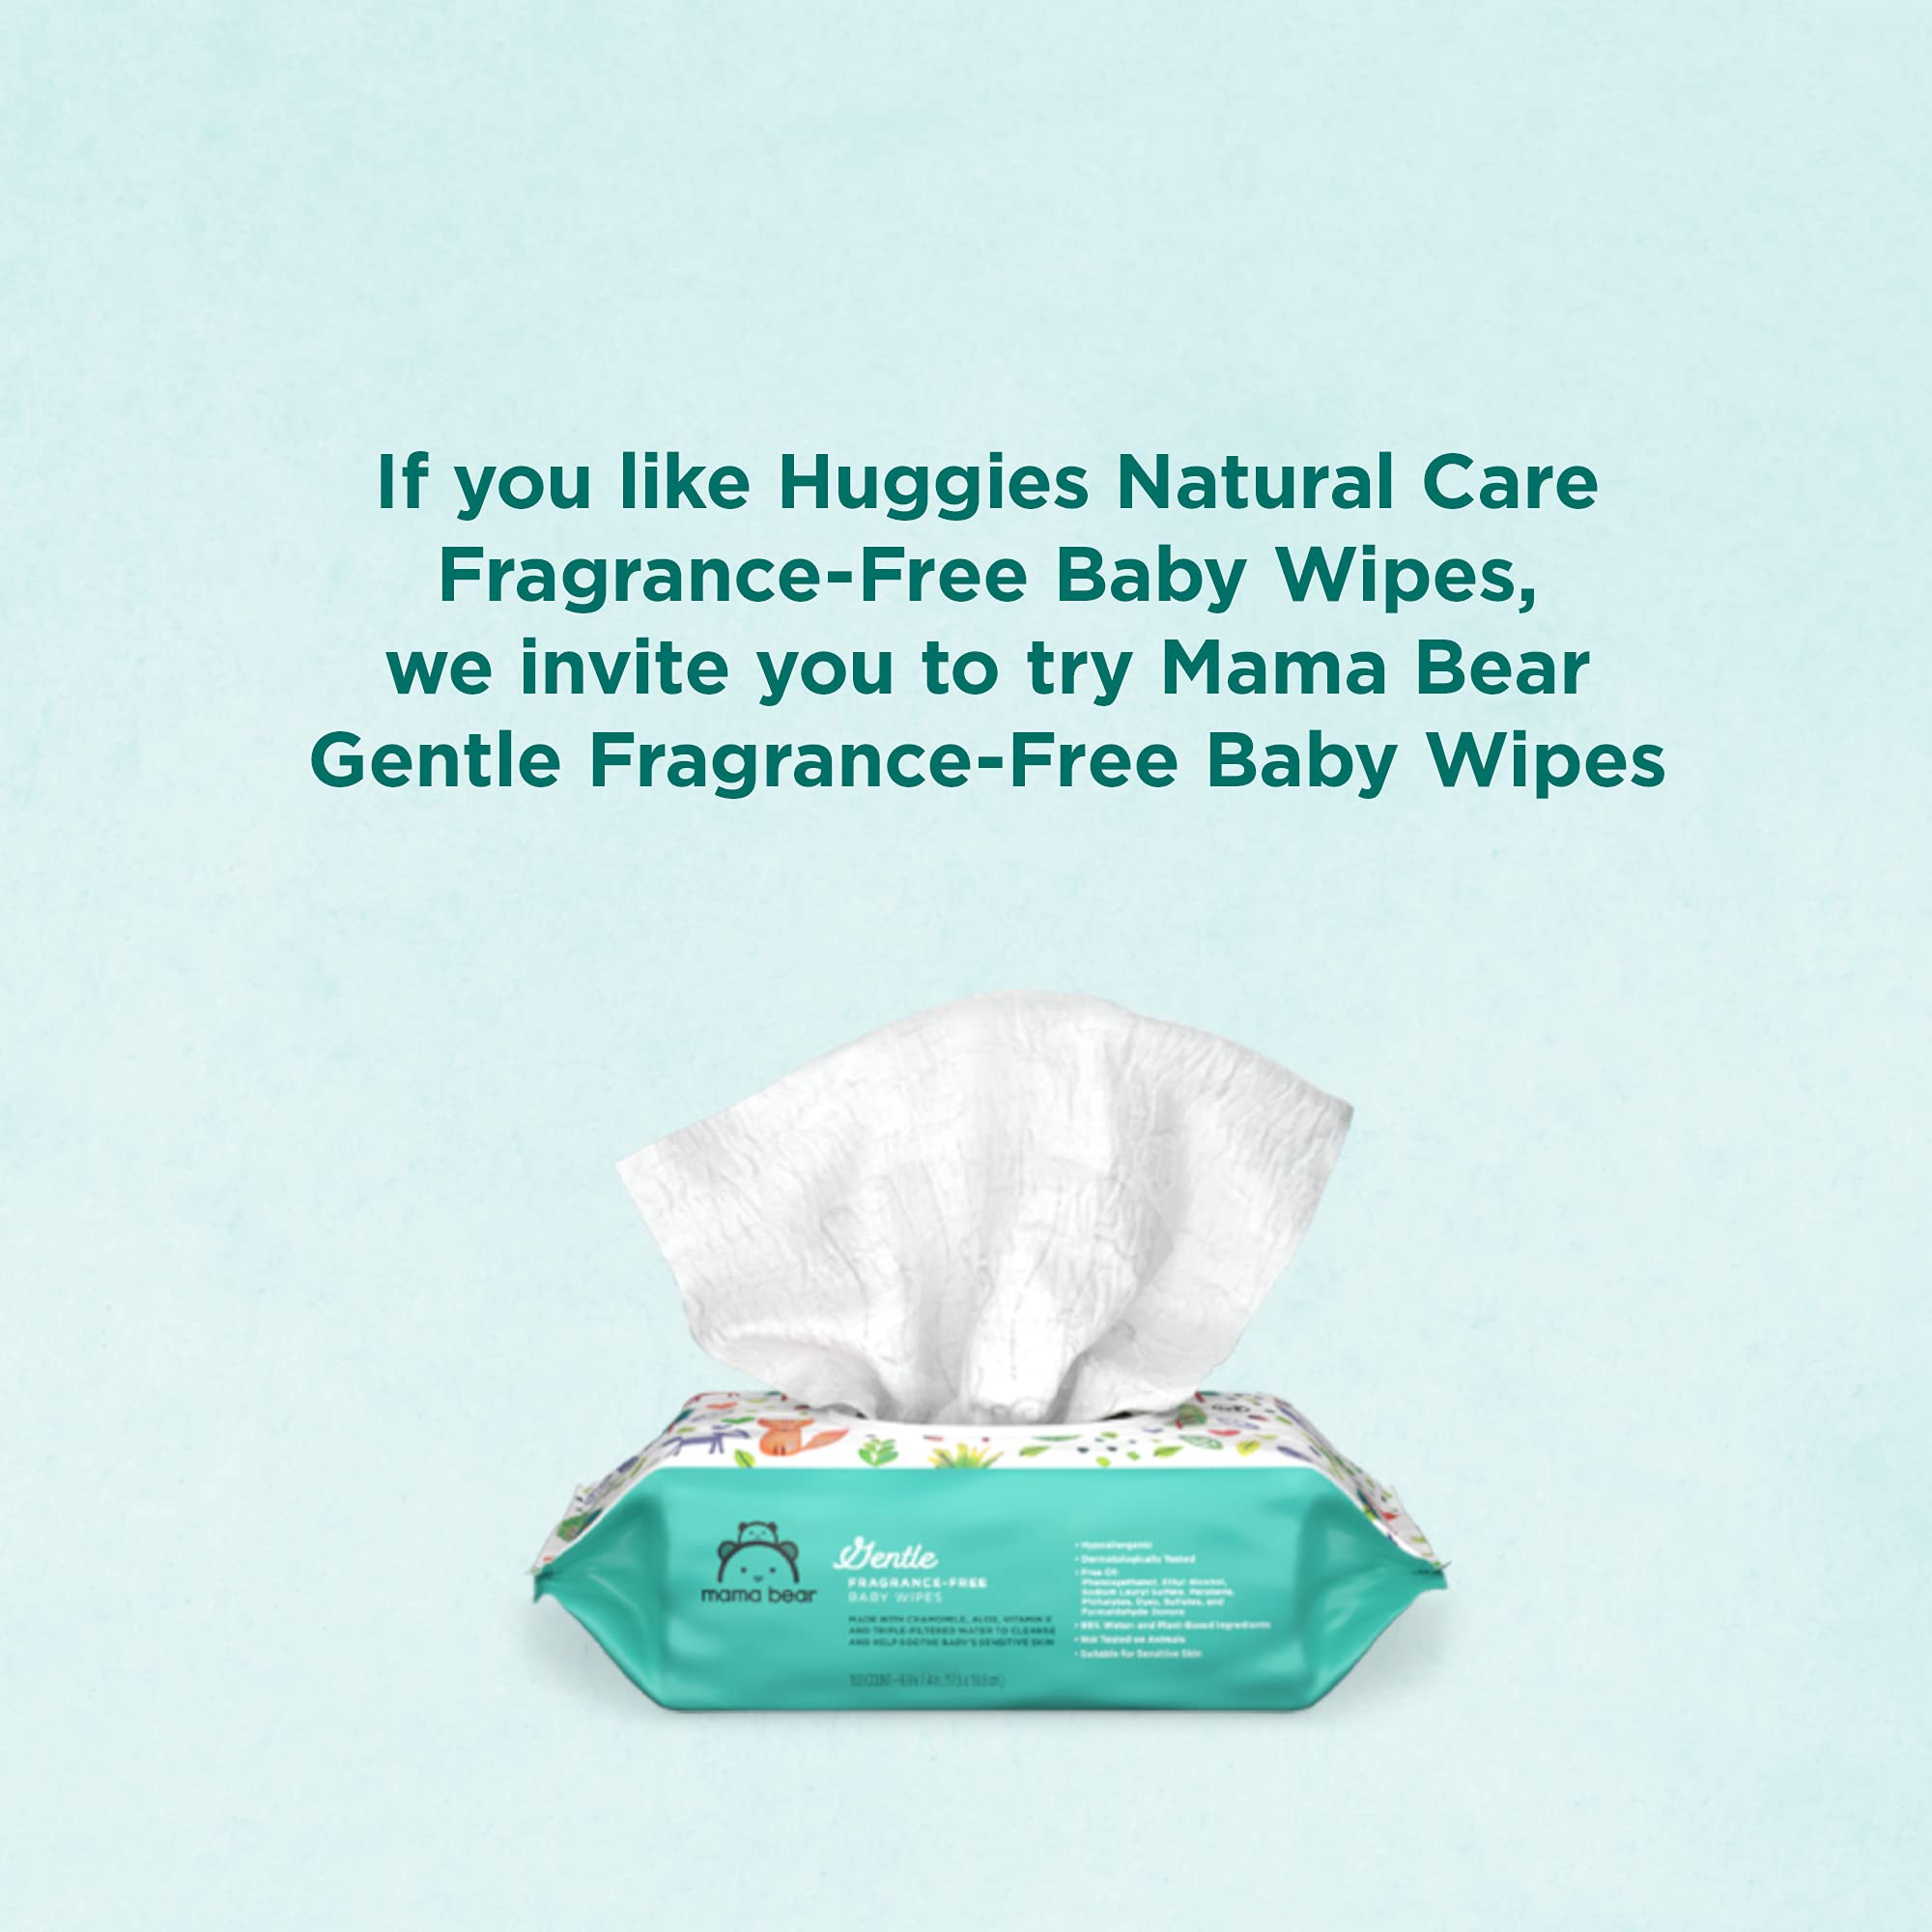 Amazon Brand - Mama Bear Gentle Fragrance Free Baby Wipes, Hypoallergenic, 800 Count (8 Packs of 100)